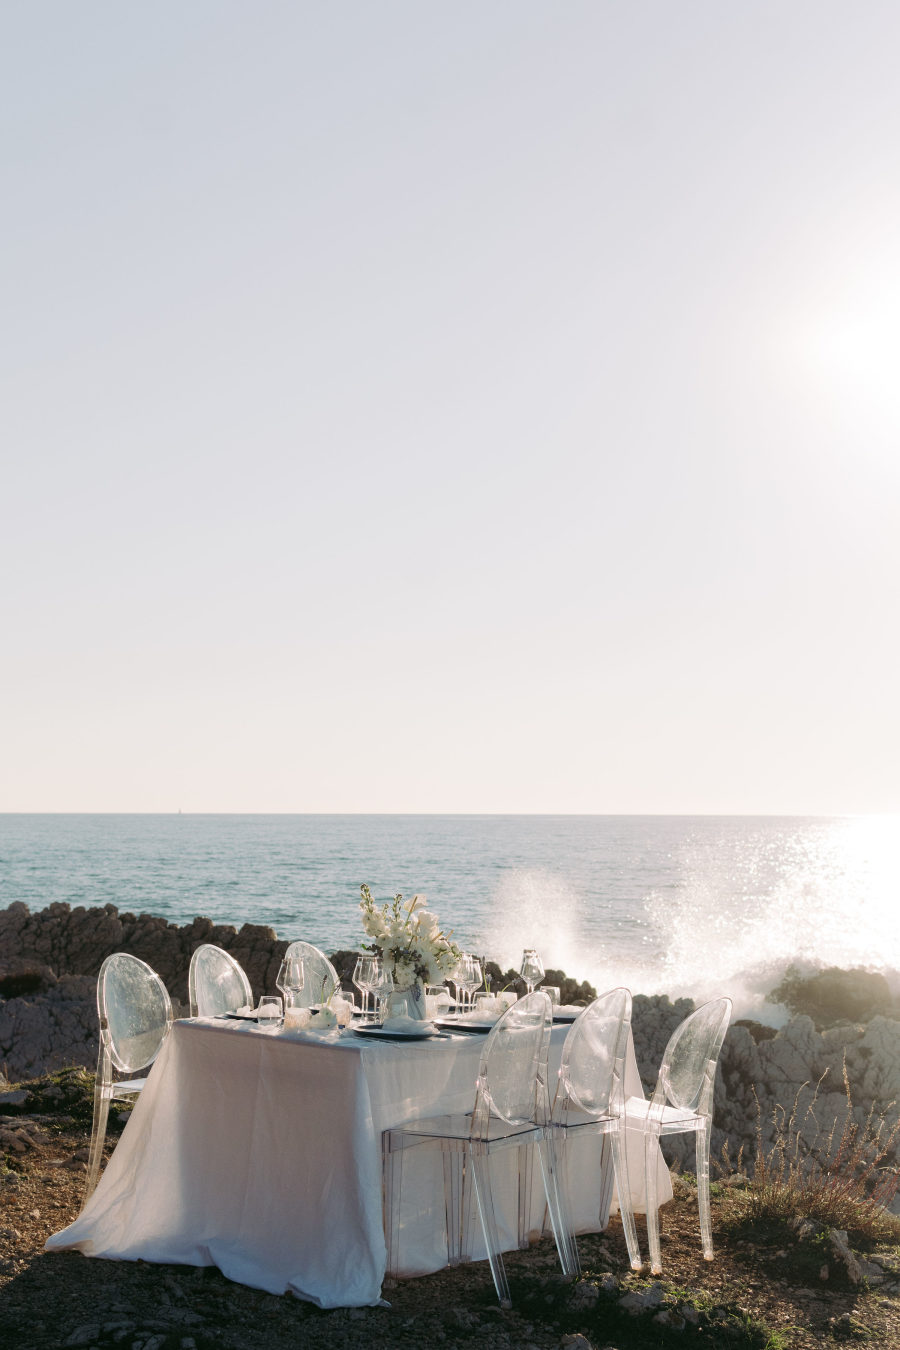 The wedding reception space was done right on the beach, next to the sea